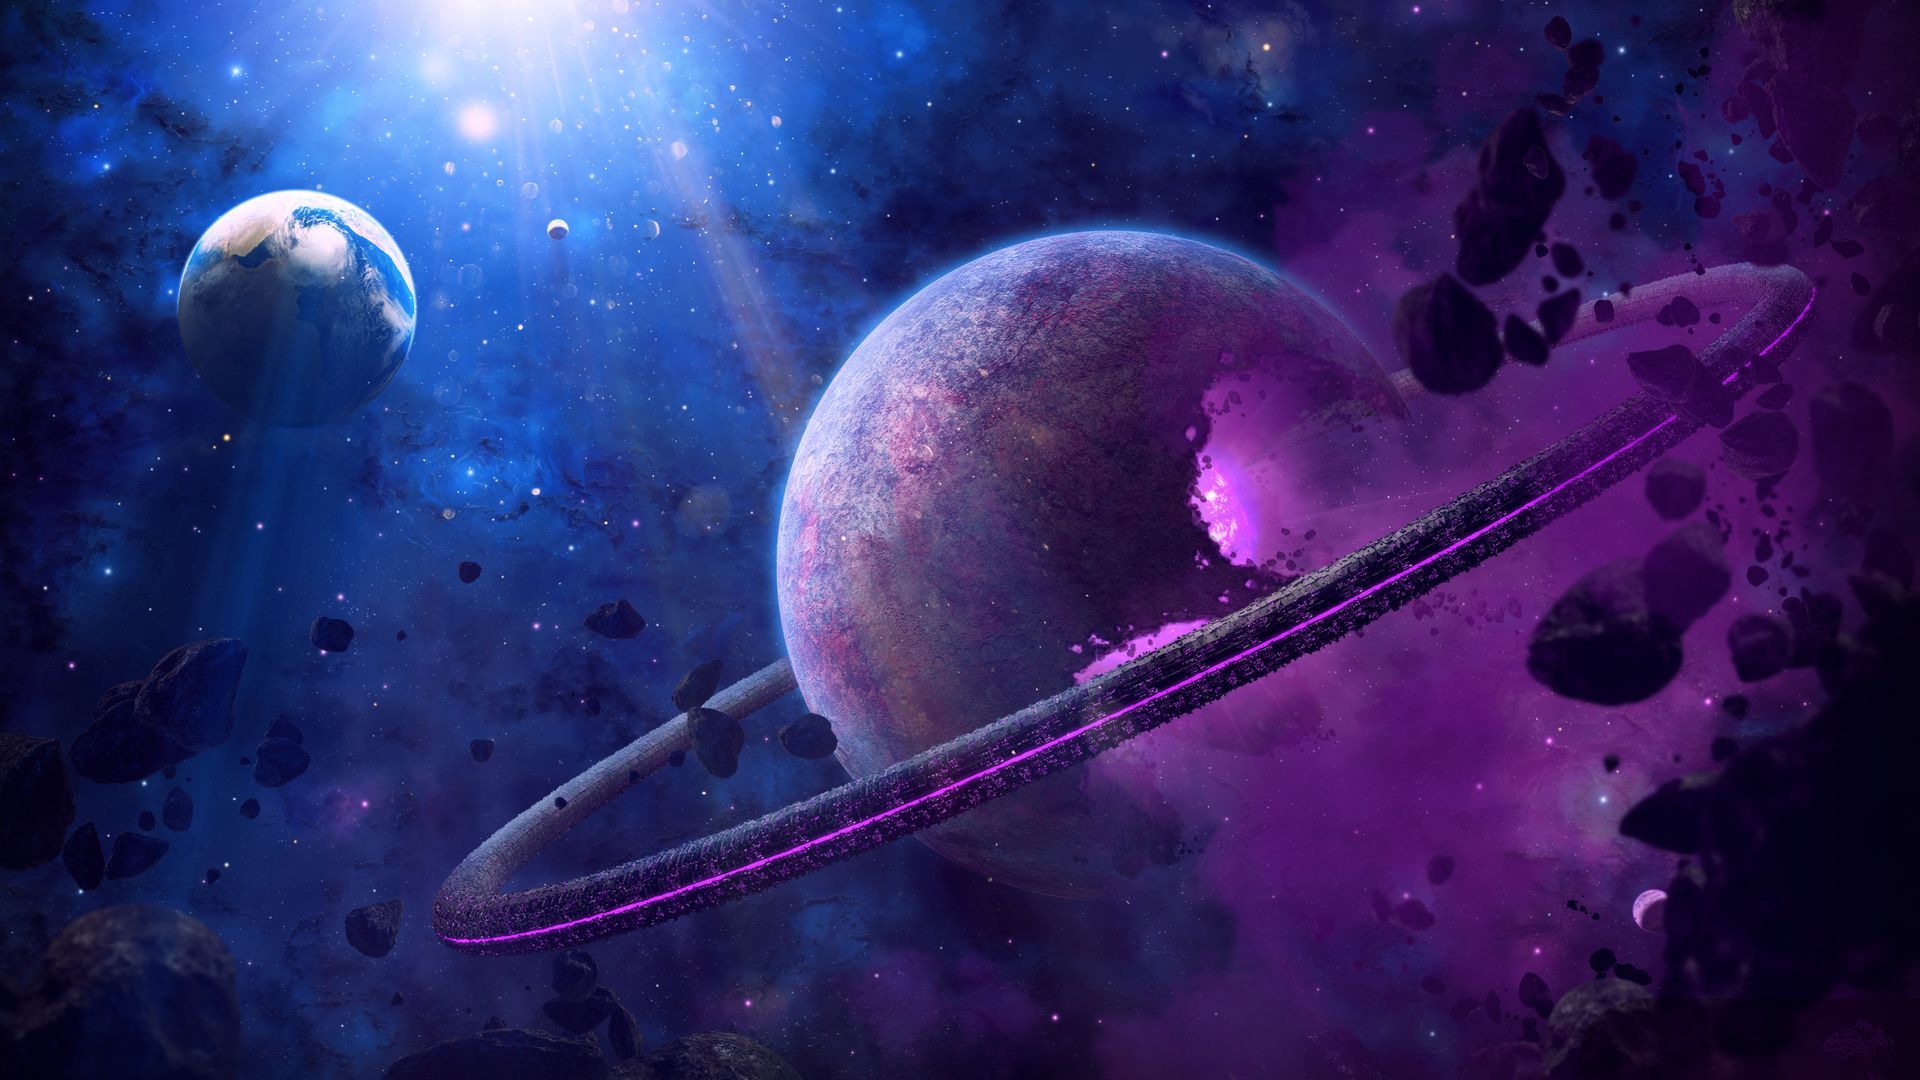 Space Themed hd wallpaper download